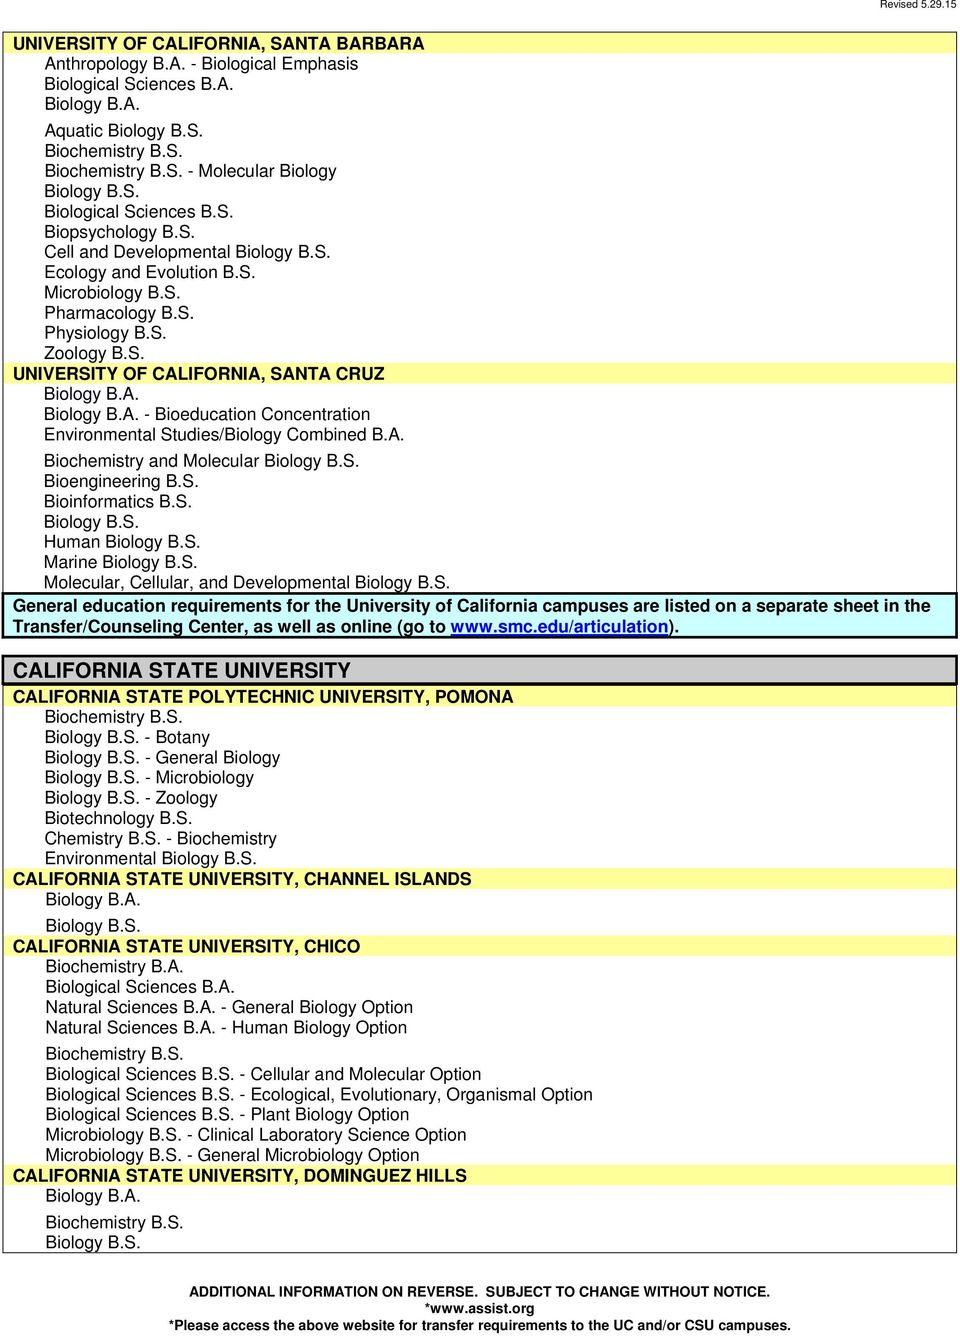 S. Human Marine Molecular, Cellular, and Developmental General education requirements for the University of California campuses are listed on a separate sheet in the Transfer/Counseling Center, as